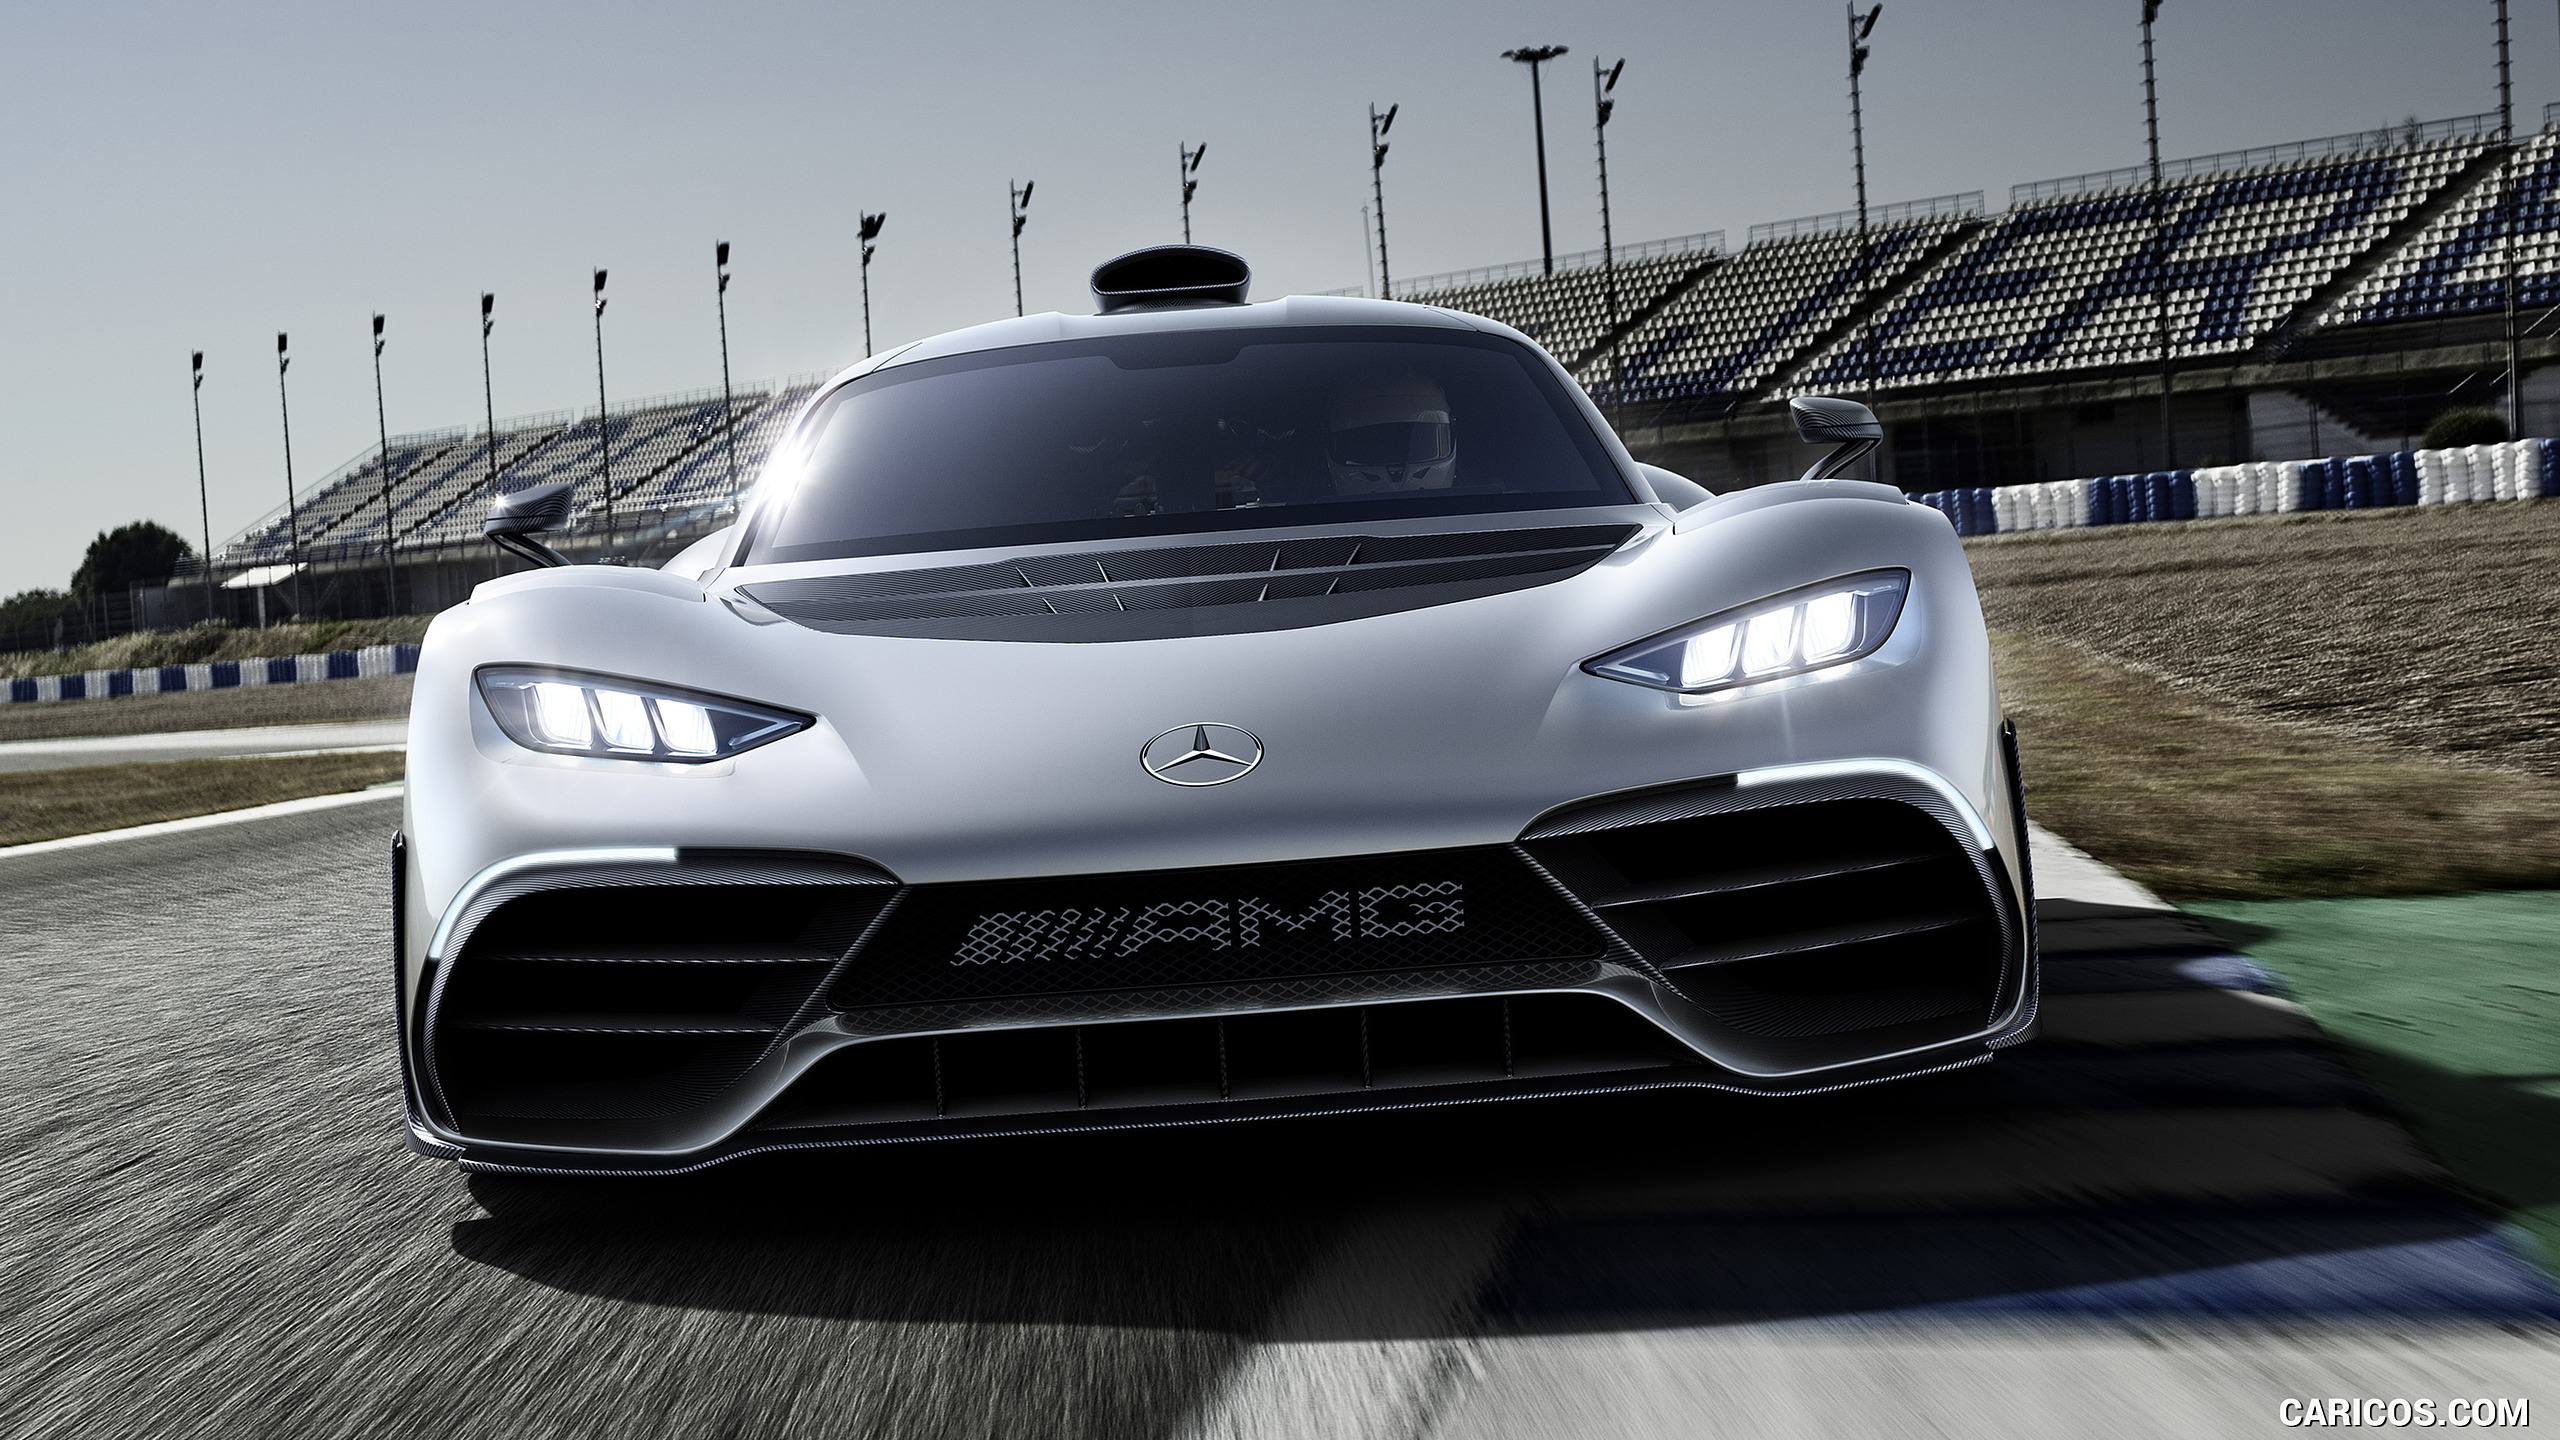 2017 Mercedes-AMG Project ONE - Front, #7 of 13